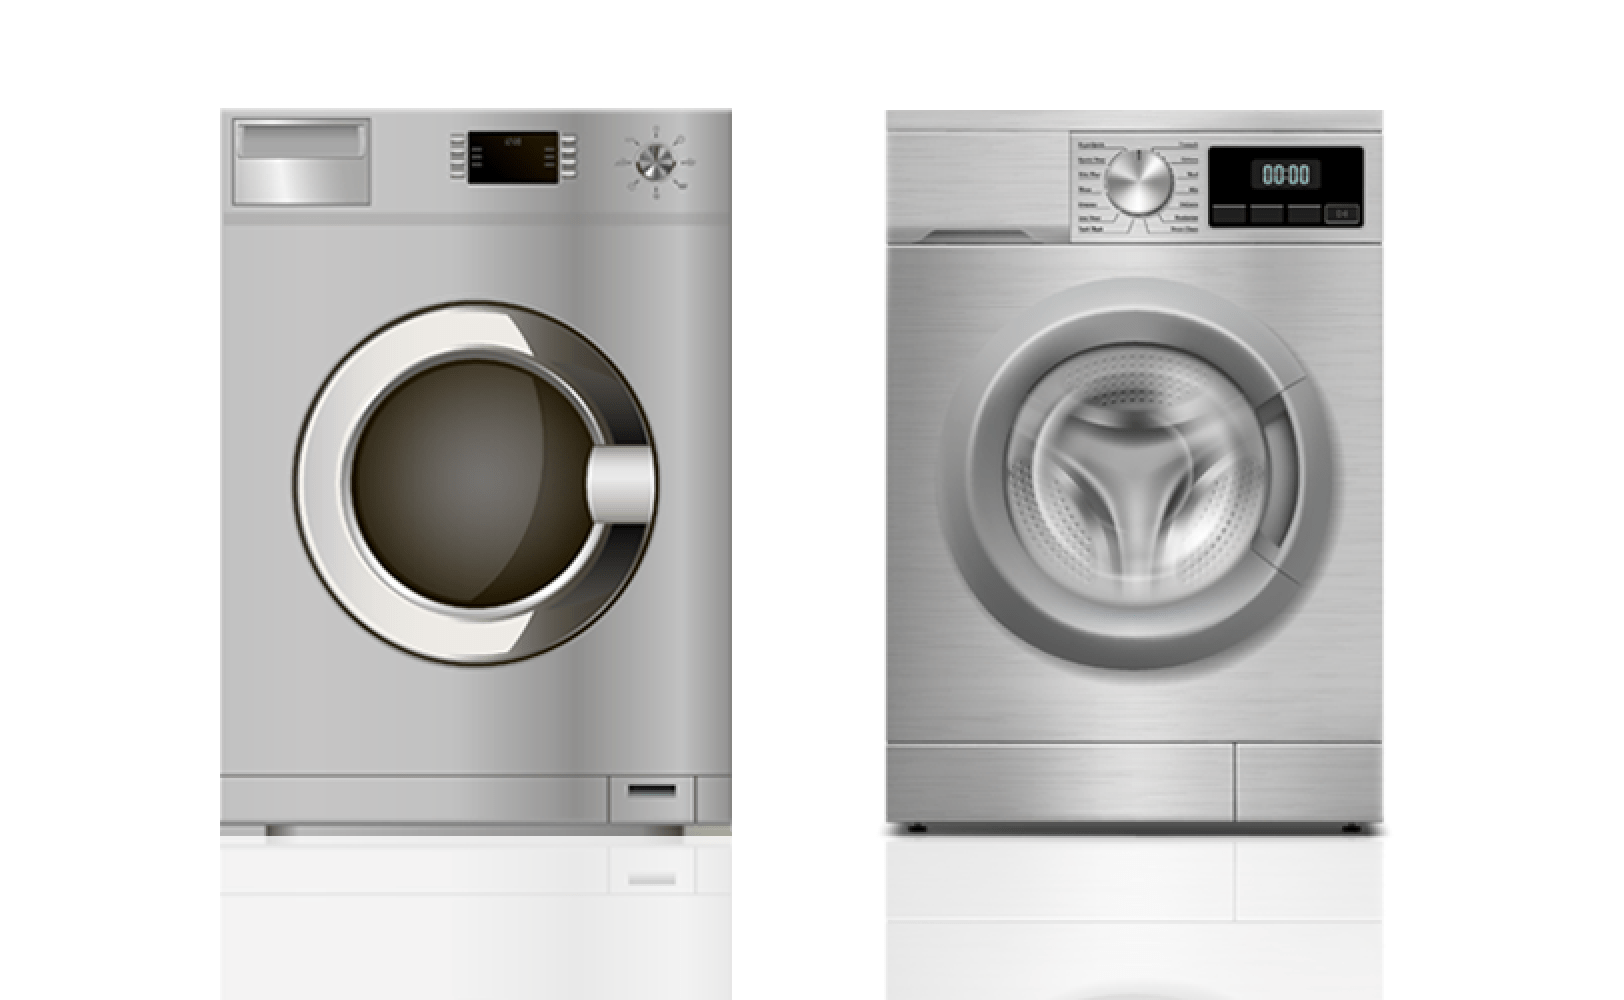 Washer Repair Service in New York